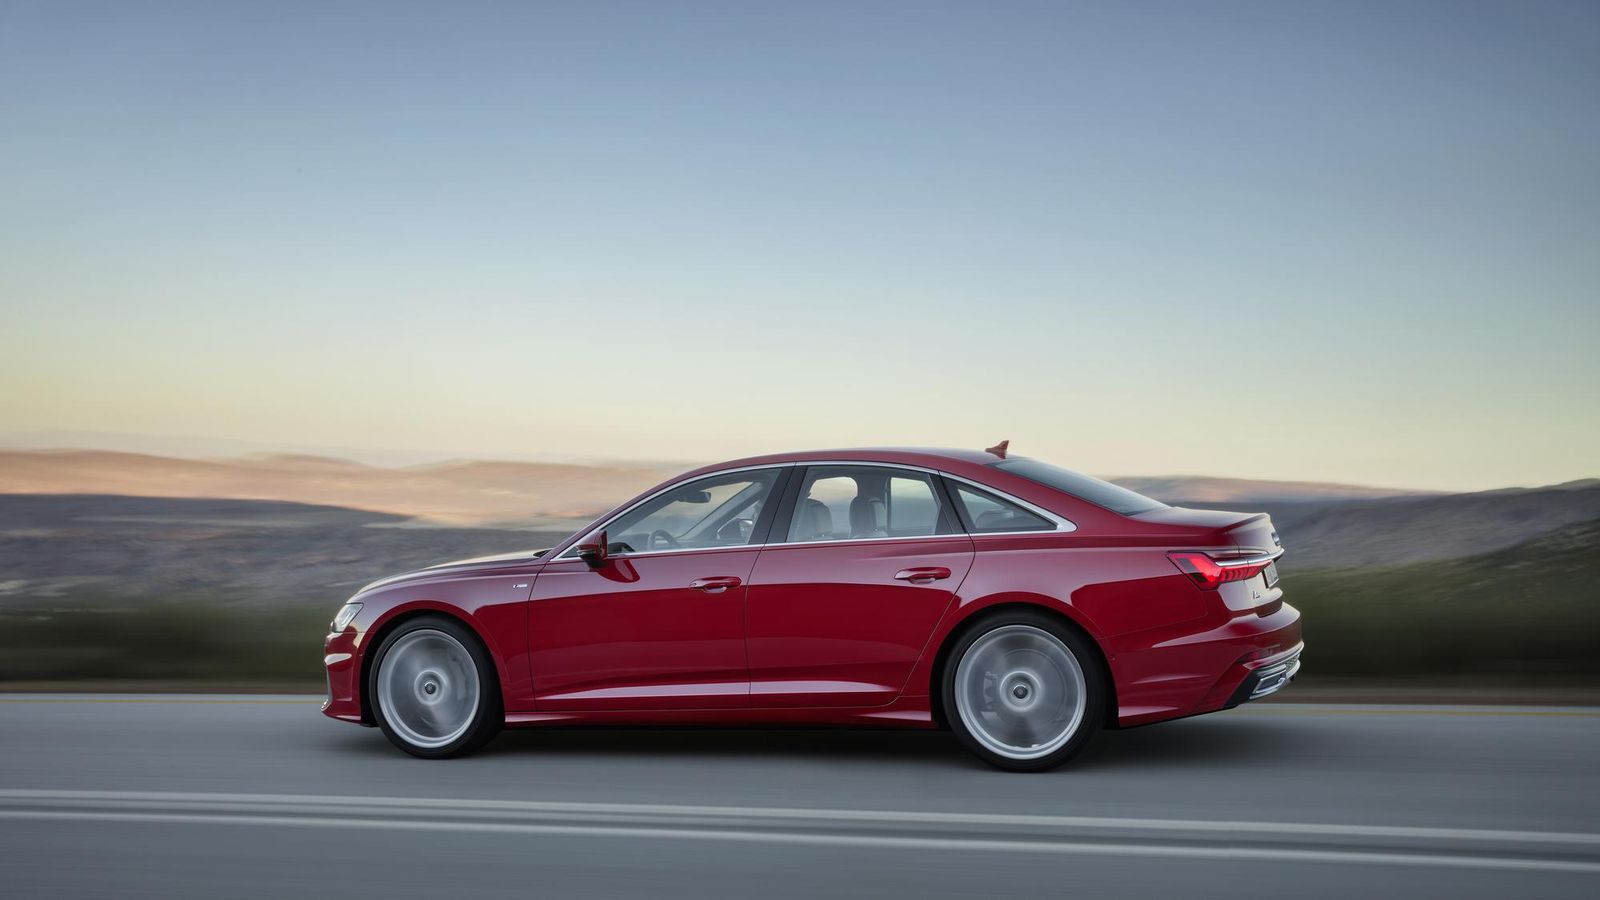 2019 Audi A6 C8 official pictures 20